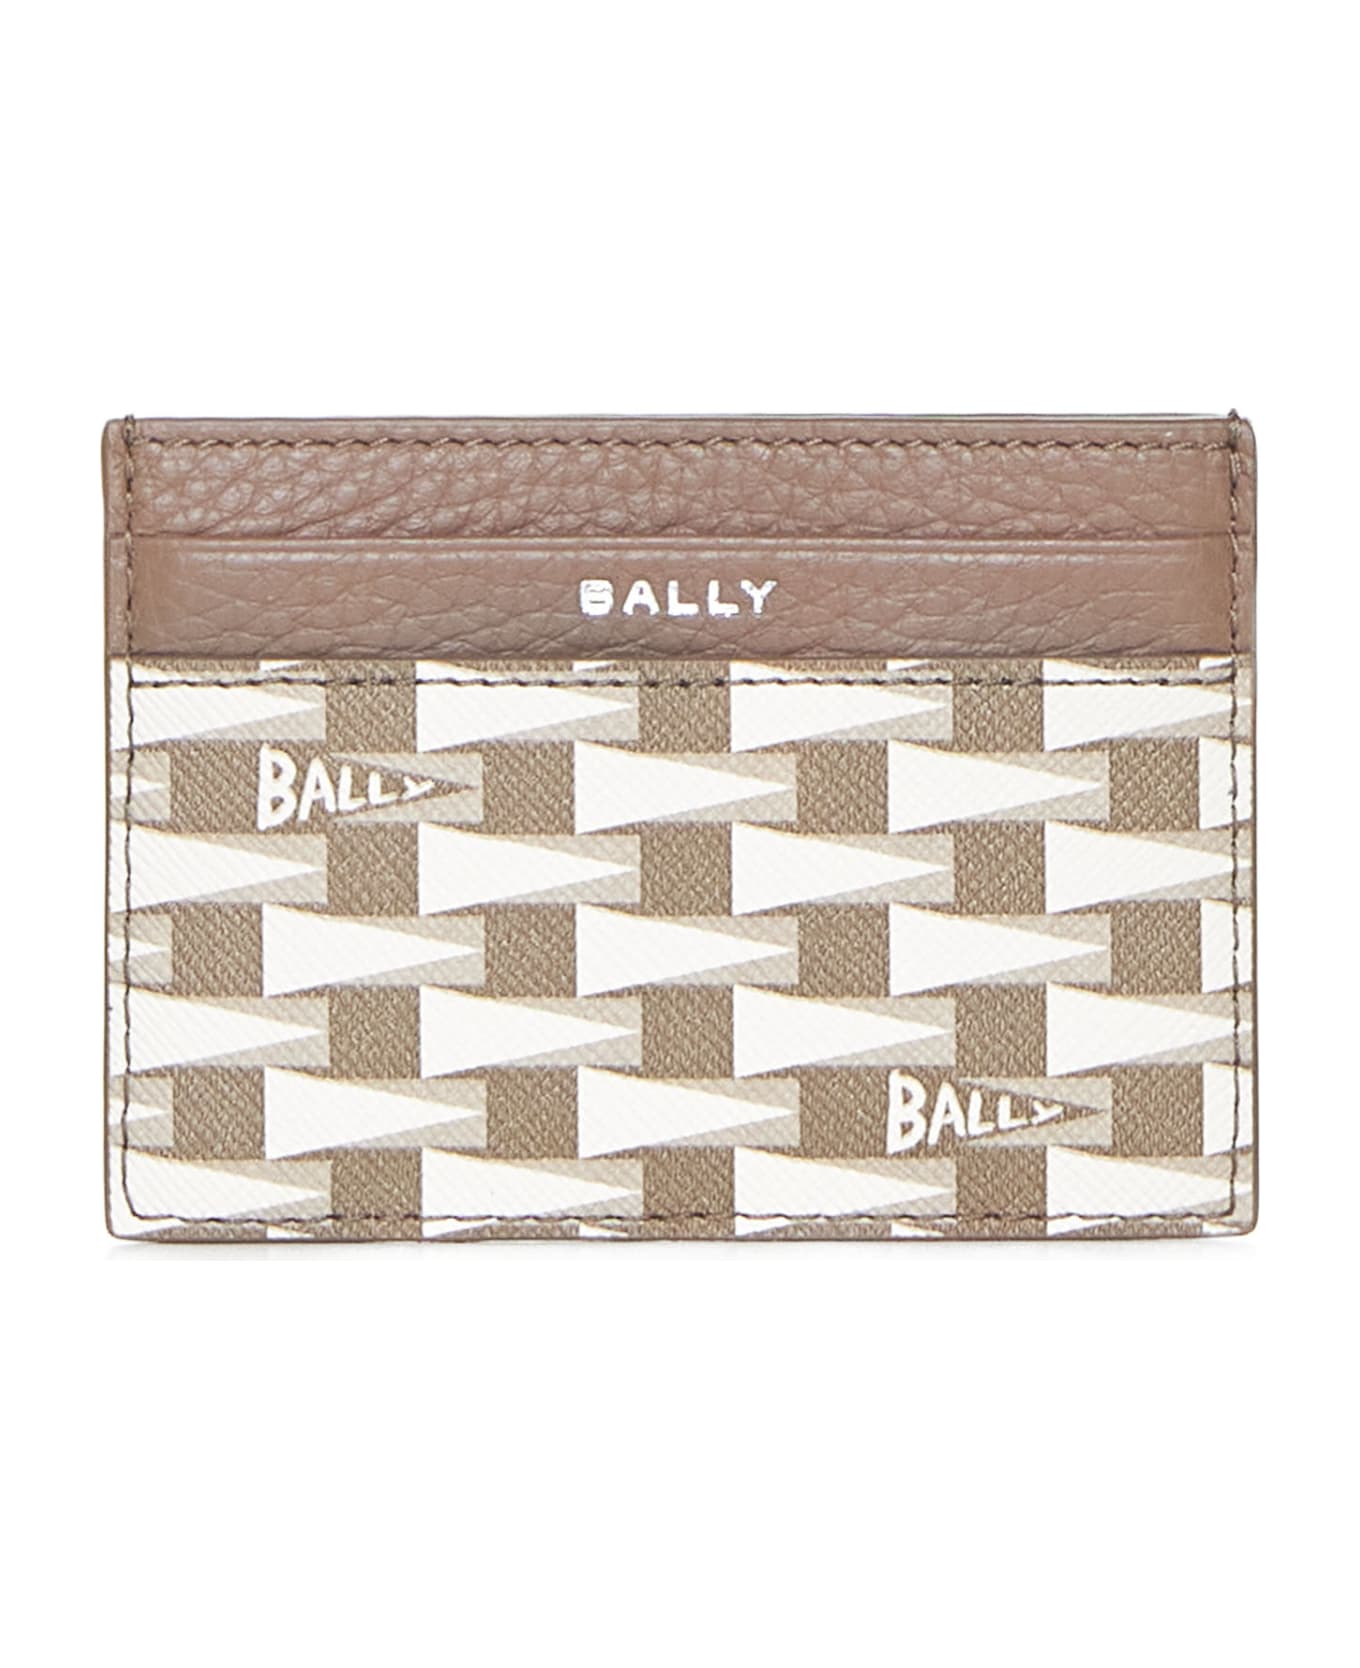 Bally Wallet - to chat with us